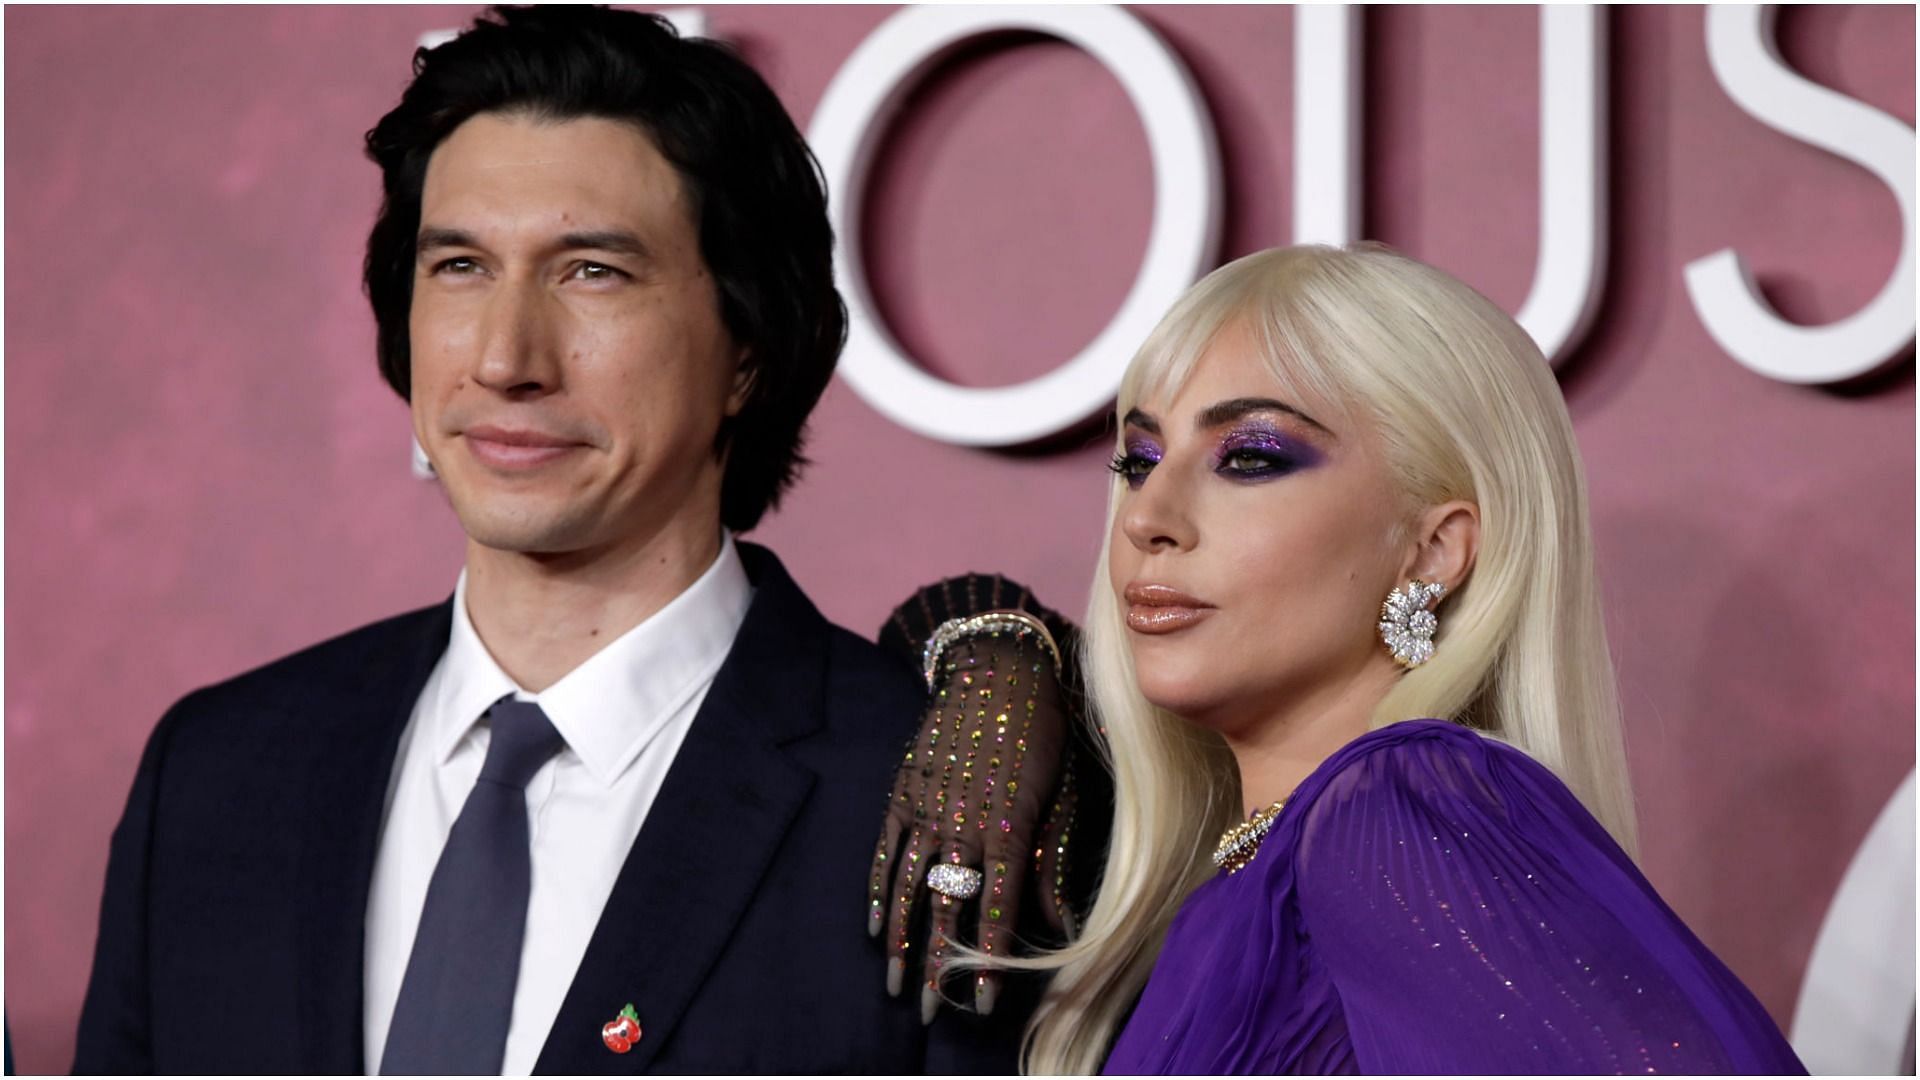 Lady dating gaga now who is Who is